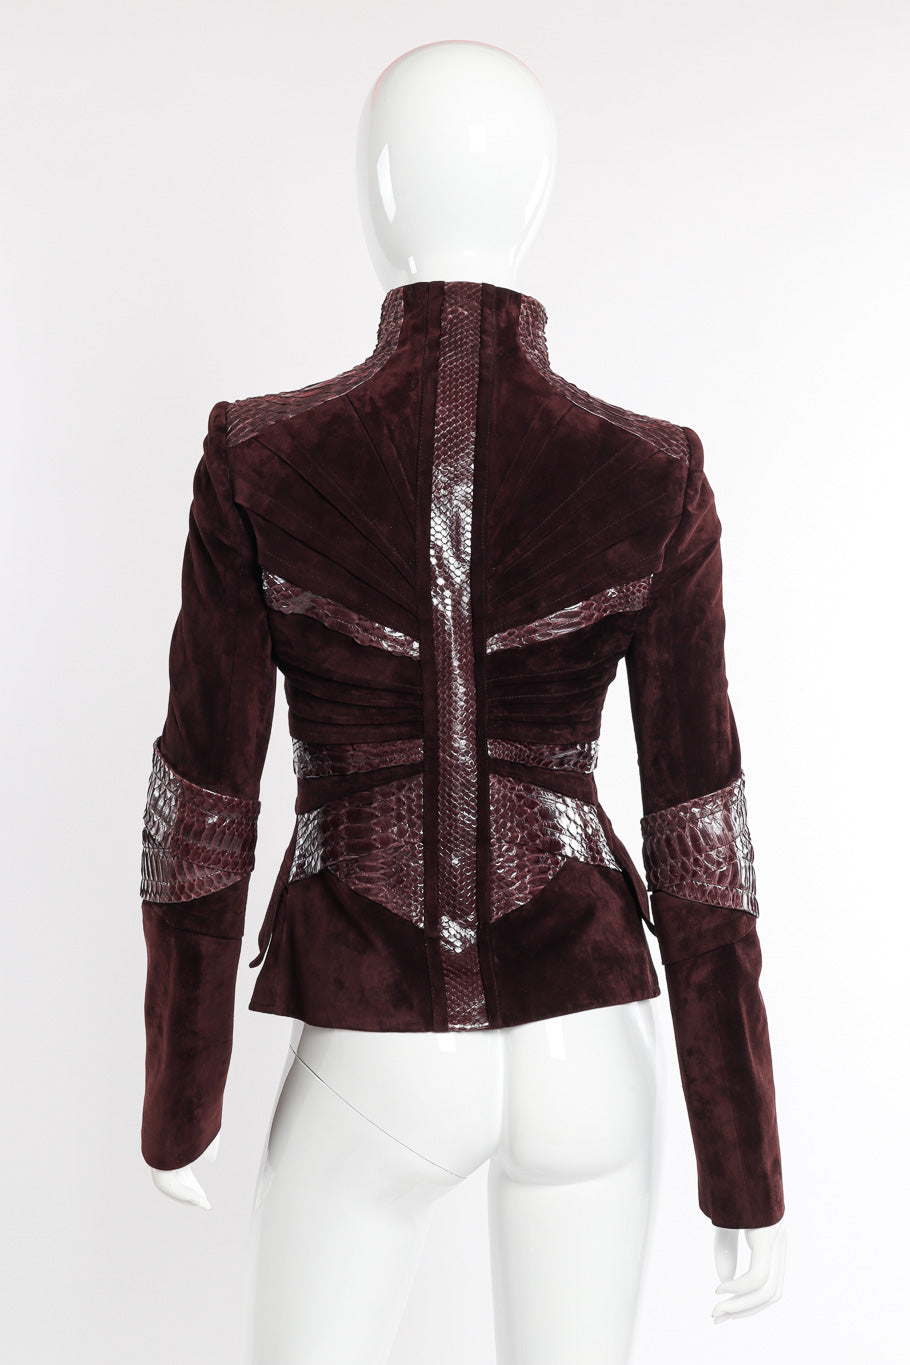 2004 F/W Suede Python Darted Jacket by Gucci on mannequin back @recessla